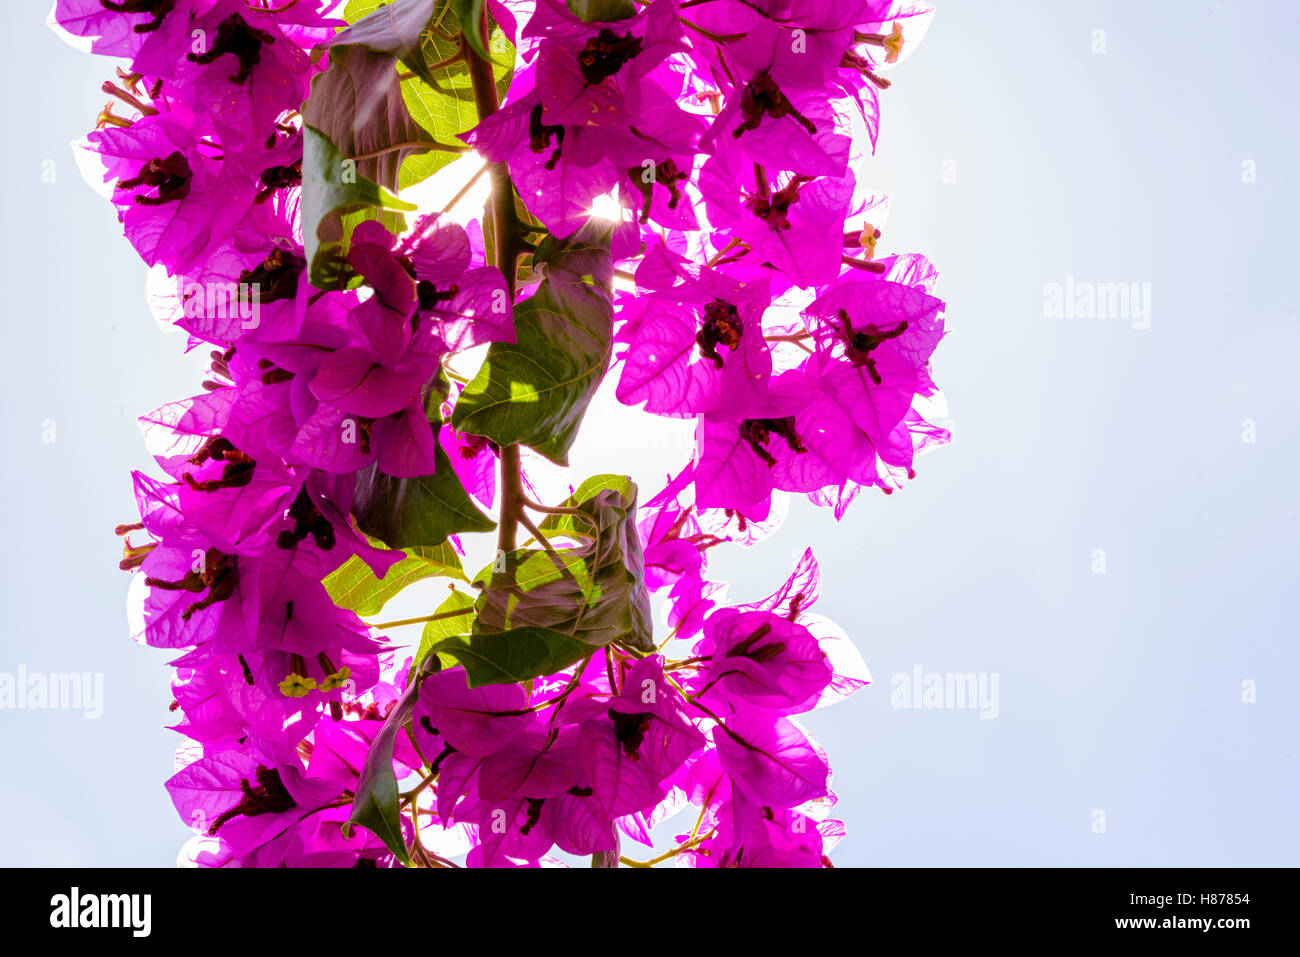 Bougainvilleas or Paper flower treetop against blue sky as background and backlit with sunstars pouring through the blossoms Stock Photo